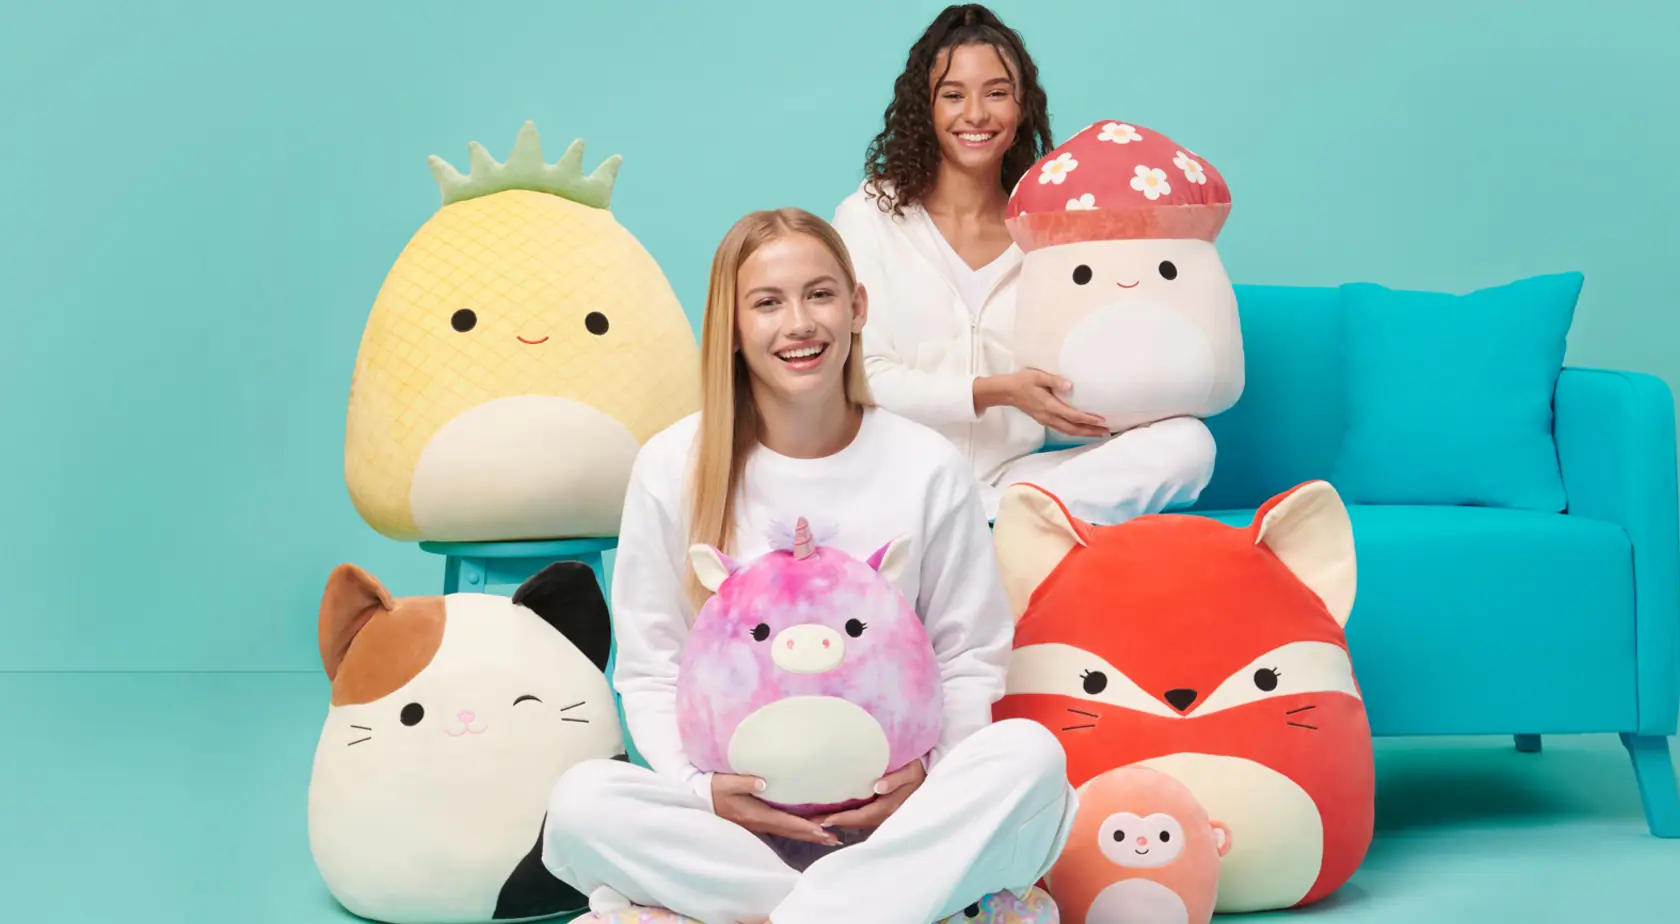 Squishmallows Plush Toy Of the Year